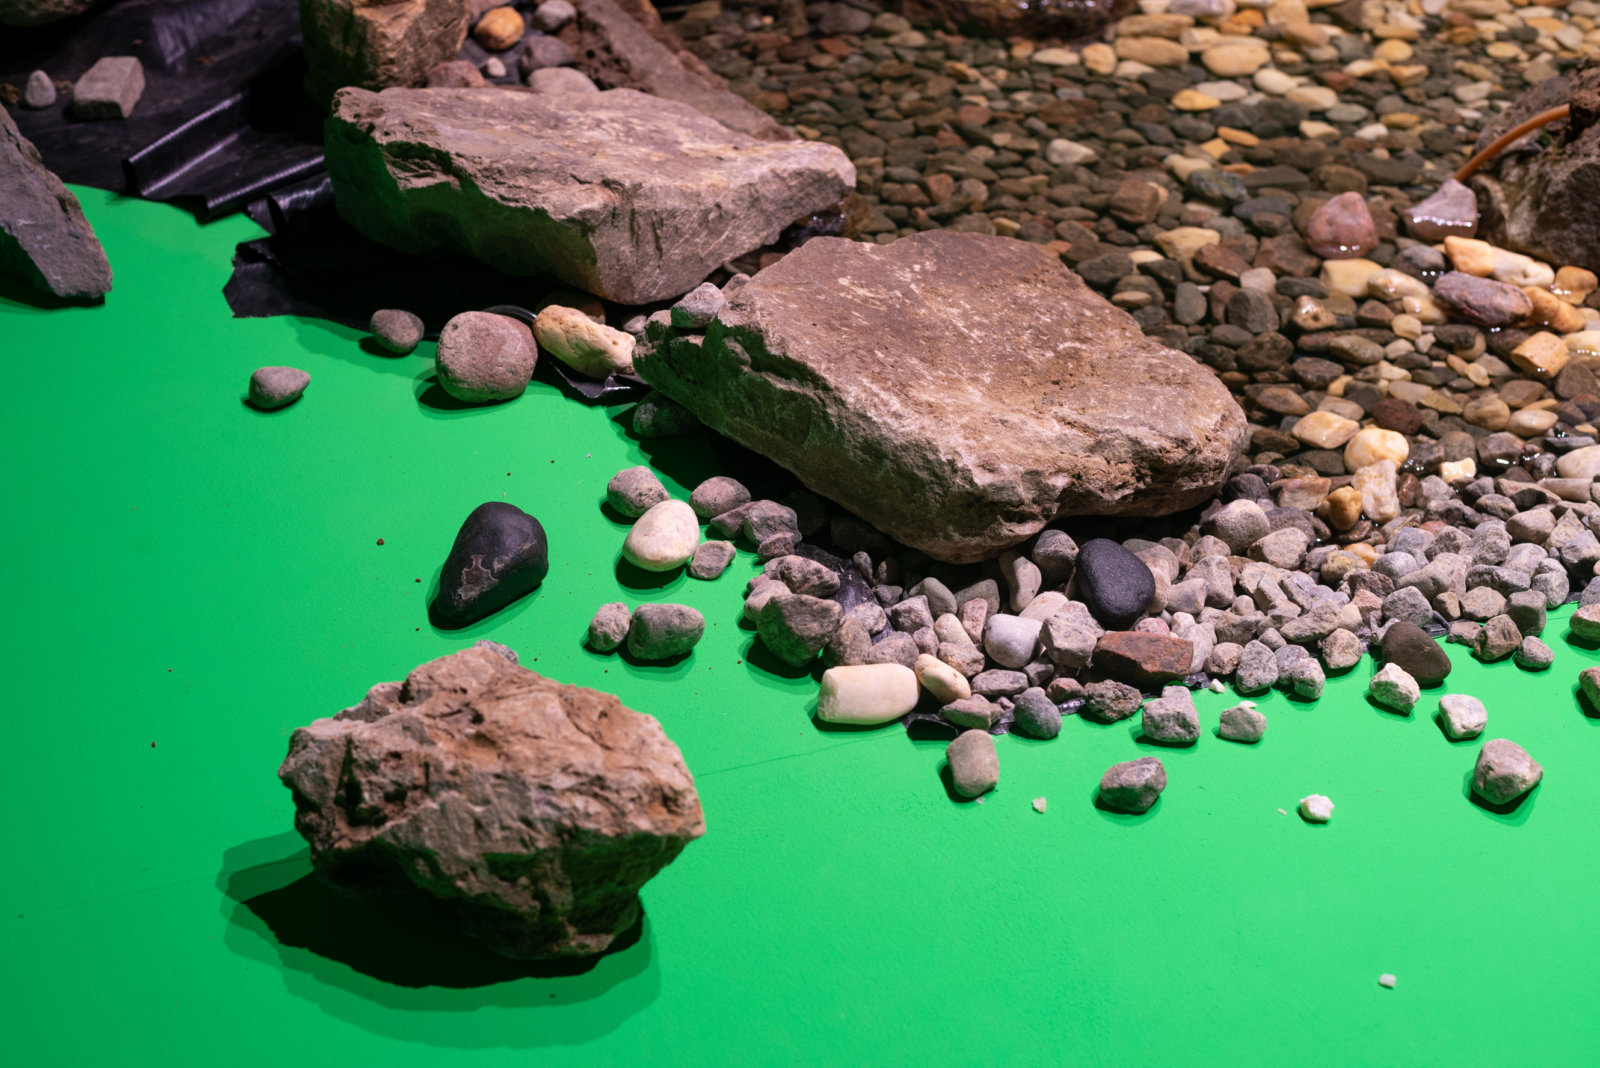 Abbas Akhavan, spill (detail), 2021, boulders, rocks, river stones, water, PVC pond membrane, water pumps and tubing, pressure treated lumber, baltic birch plywood, various hardware, chroma key paint, full spectrum L.E.D. lightbulbs, 144 x 144 x 144 in. (366 x 366 x 366 cm). Installation view, Sensing Nature, Momenta Biennale at Phi Foundation for Contemporary Art, Montreal, Canada